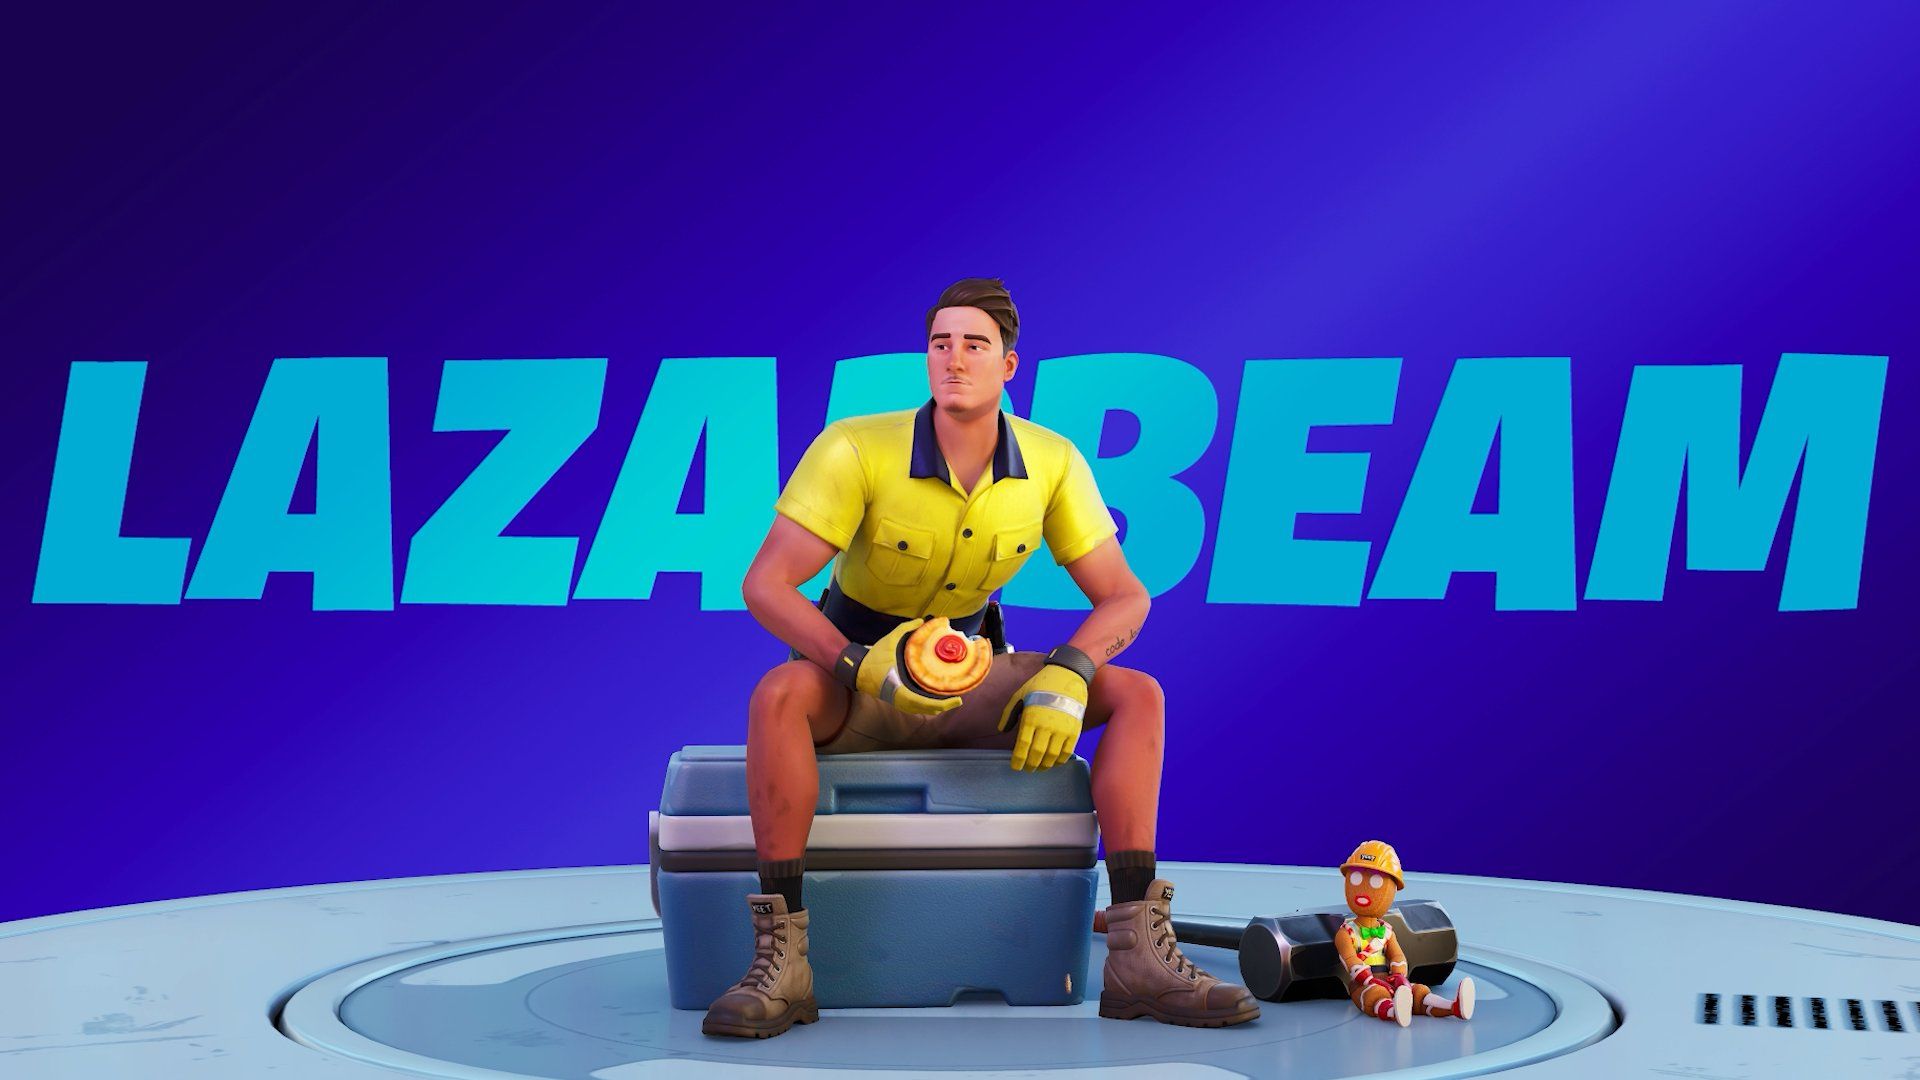 LazarBeam net worth: The Fortnite Gamer's net worth will leave fans astonished